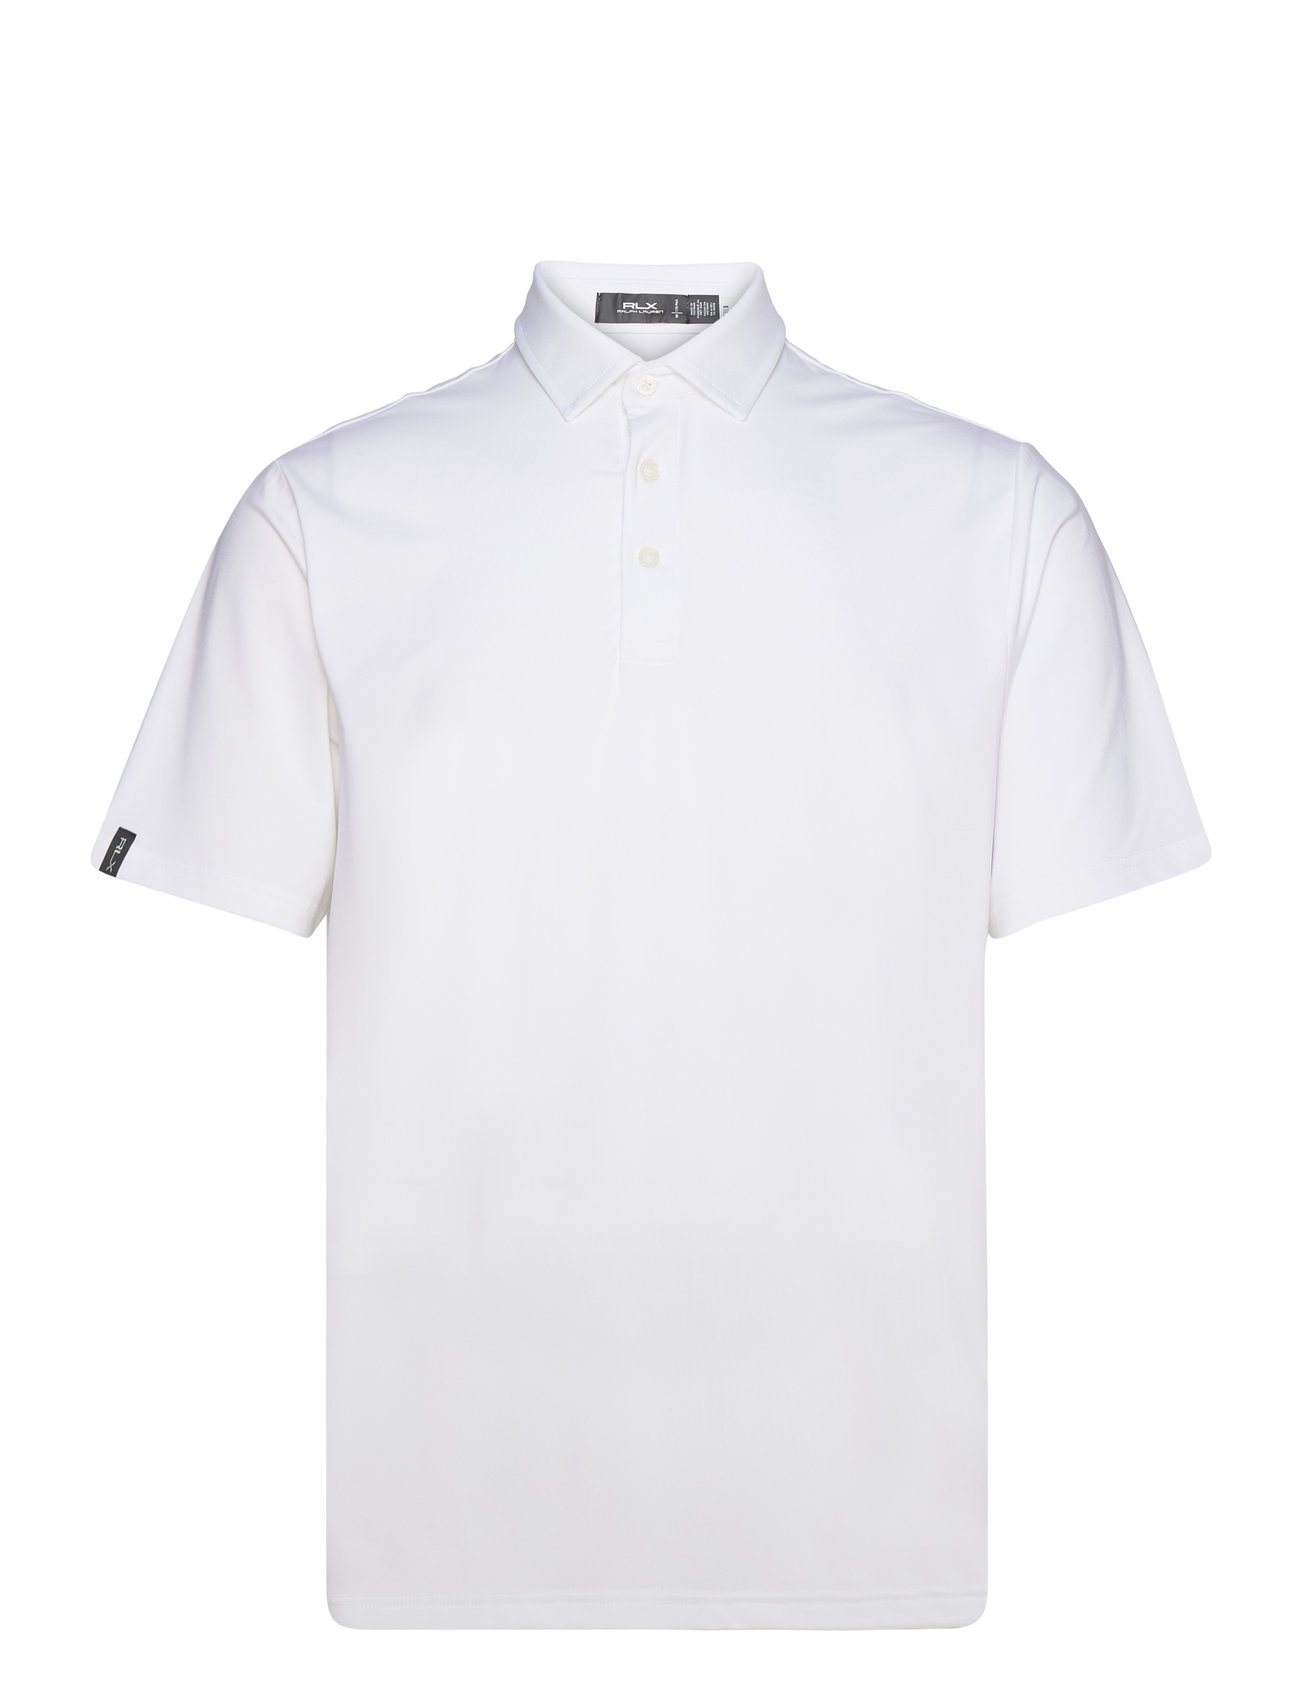 Classic Fit Performance Polo Shirt Sport Knitwear Short Sleeve Knitted Polos White Ralph Lauren Golf